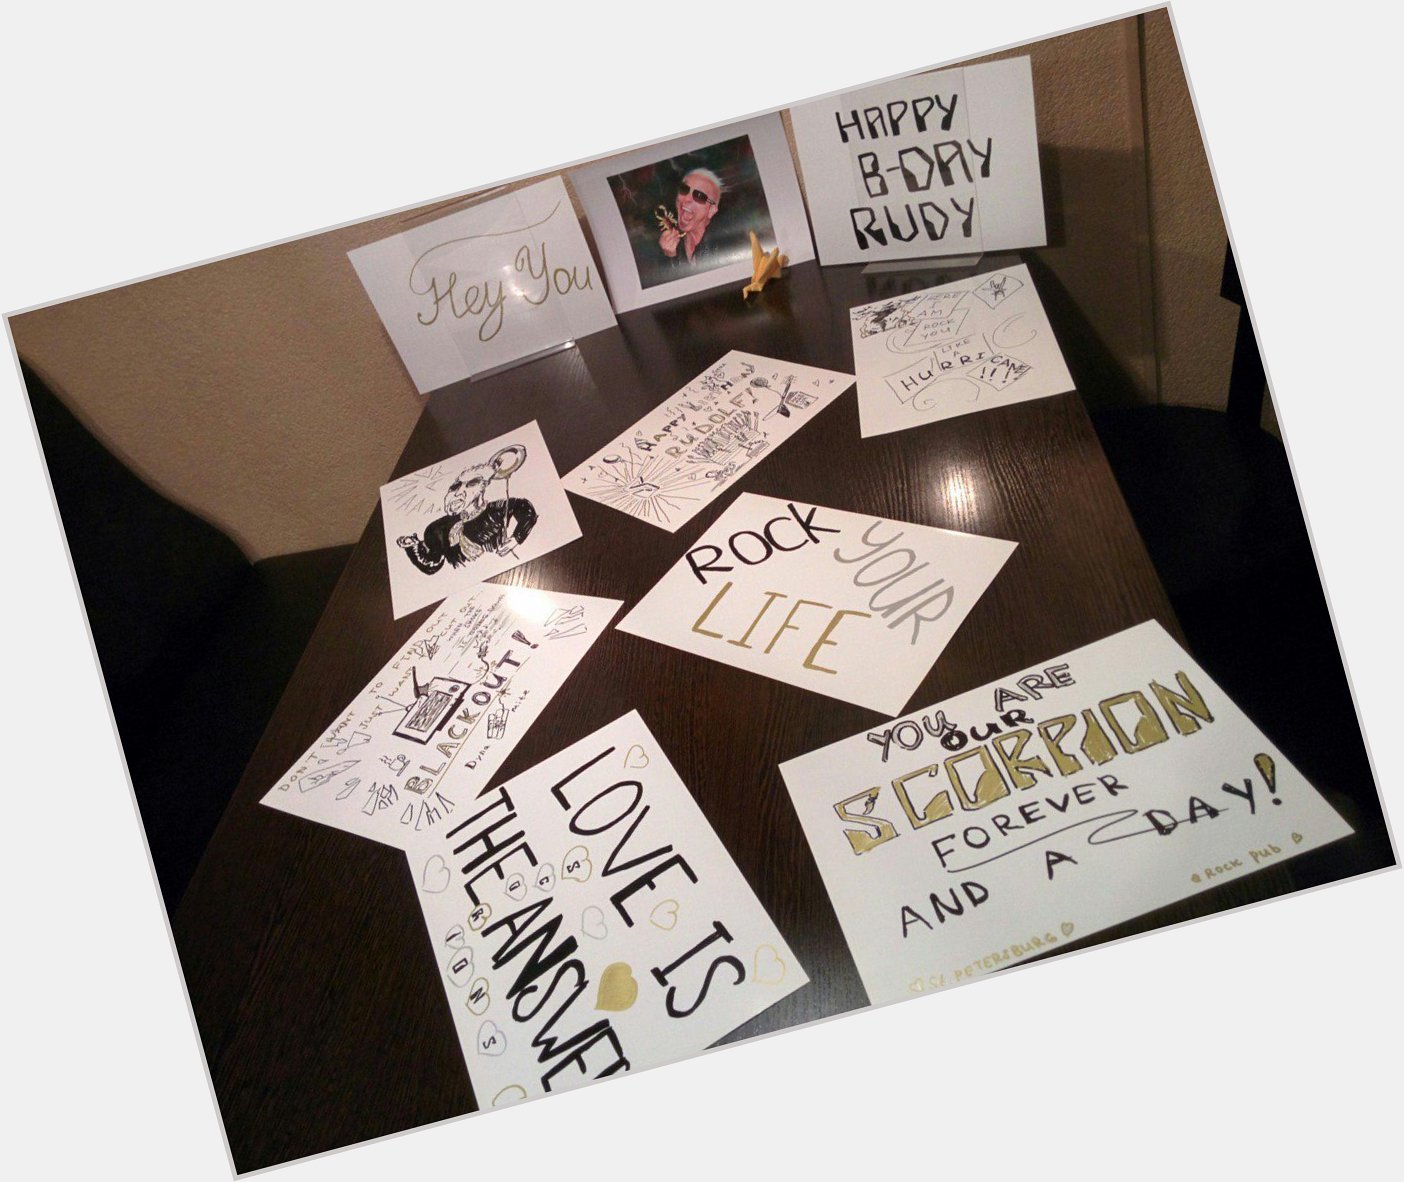 Happy Birthday, !Our gift for you - BithdayCard from Russia wiht much love!!   